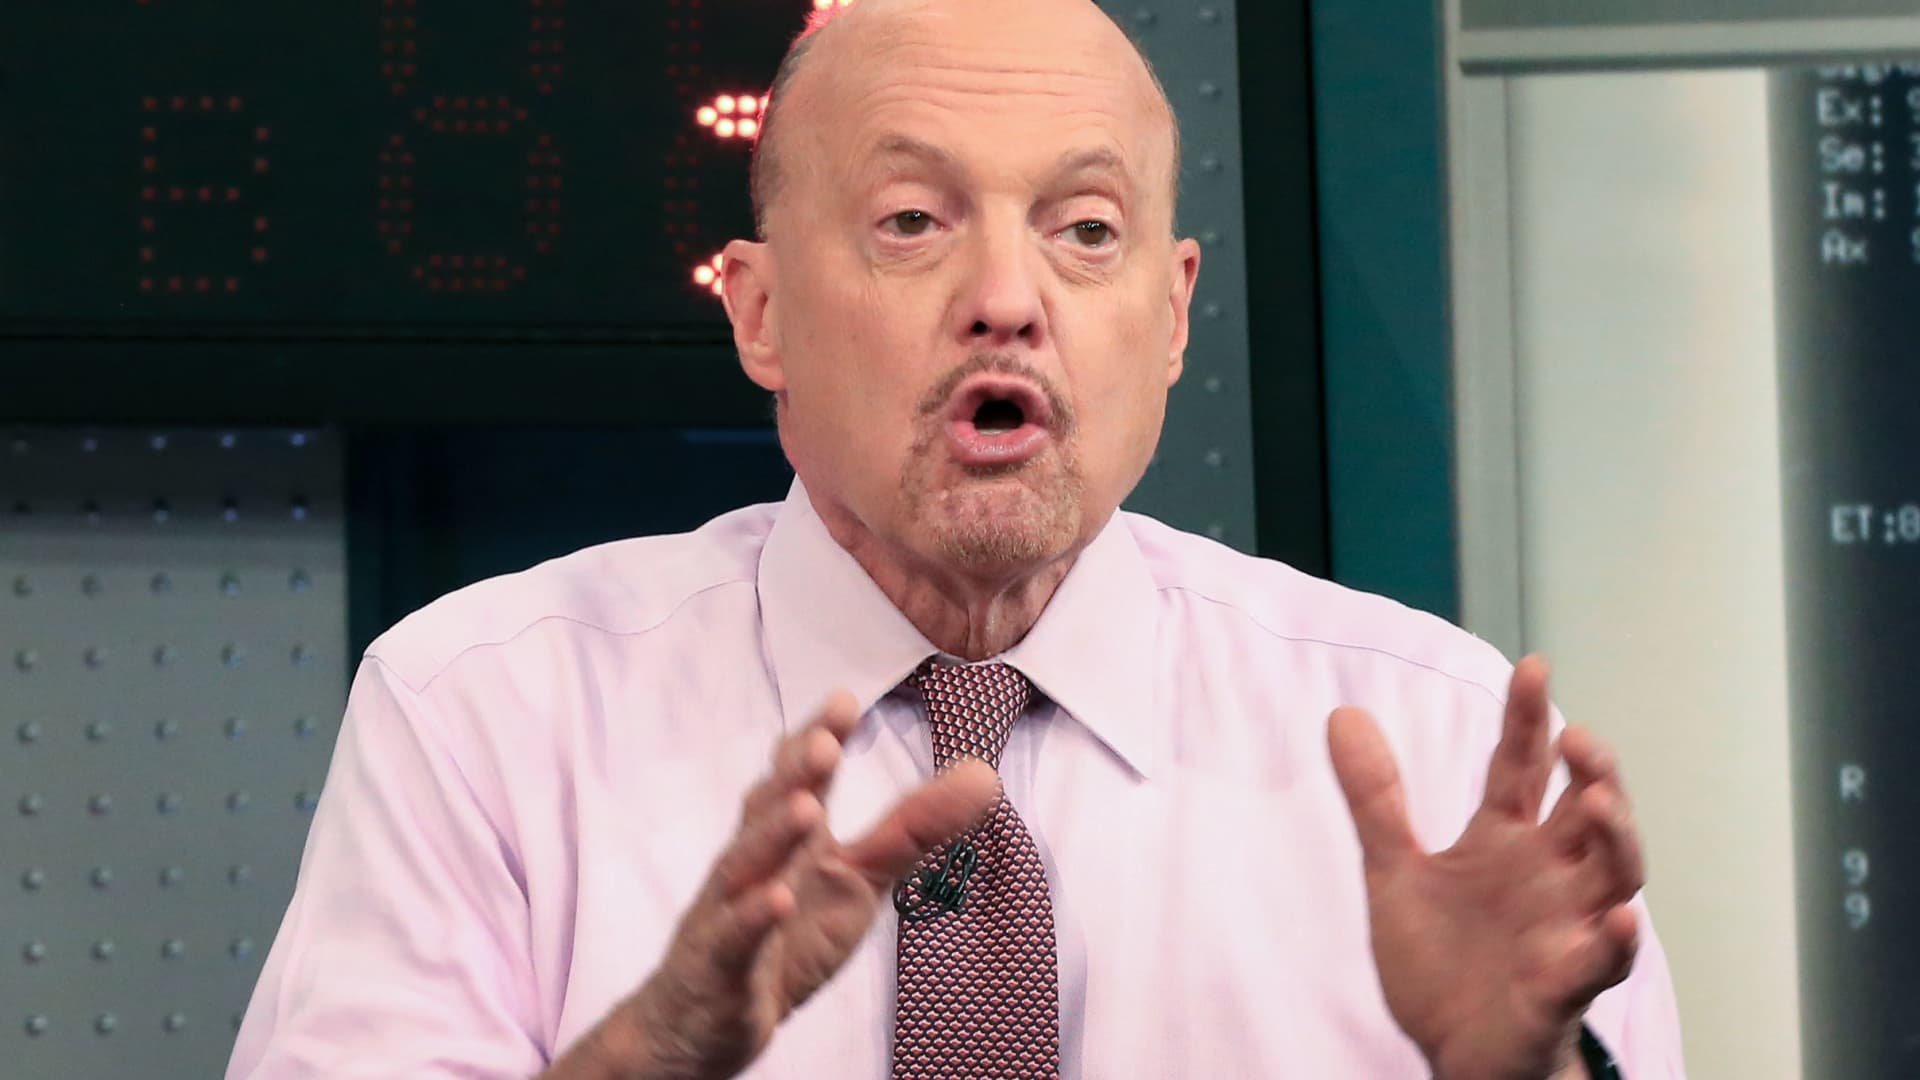 Jim Cramer says investors should remember the optionality of 6 of the Magnificent 7